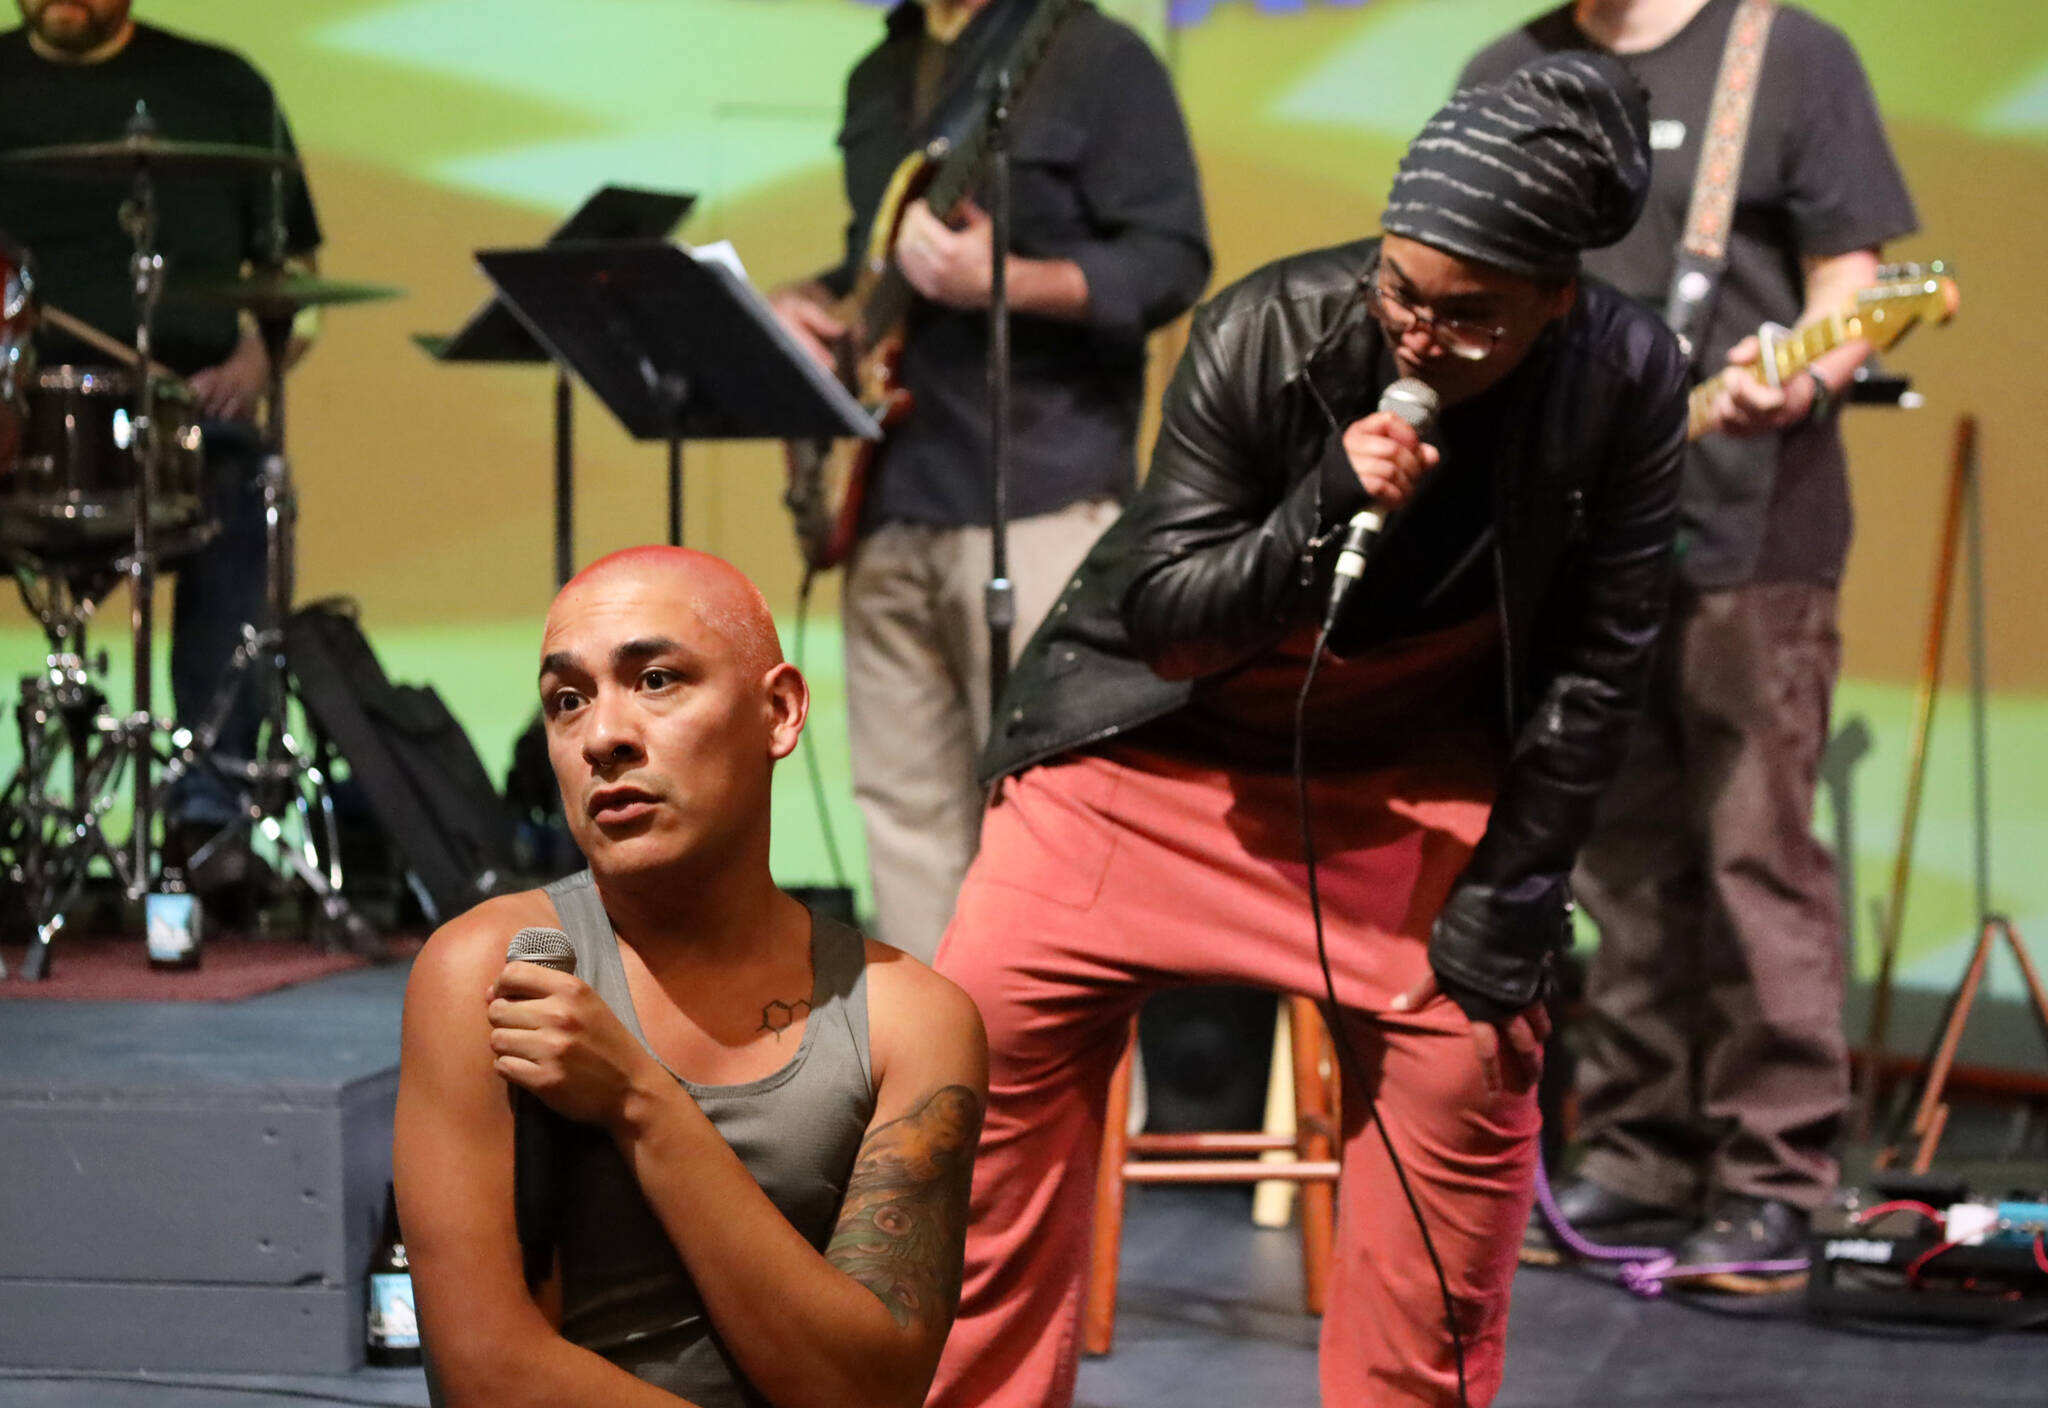 Rio Alberto and Salissa Thole interact during a rehearsal Tuesday evening of “Hedwig and The Angry Inch” which debuts at Perseverance Theatre on Sept. 15. (Clarise Larson / Juneau Empire)